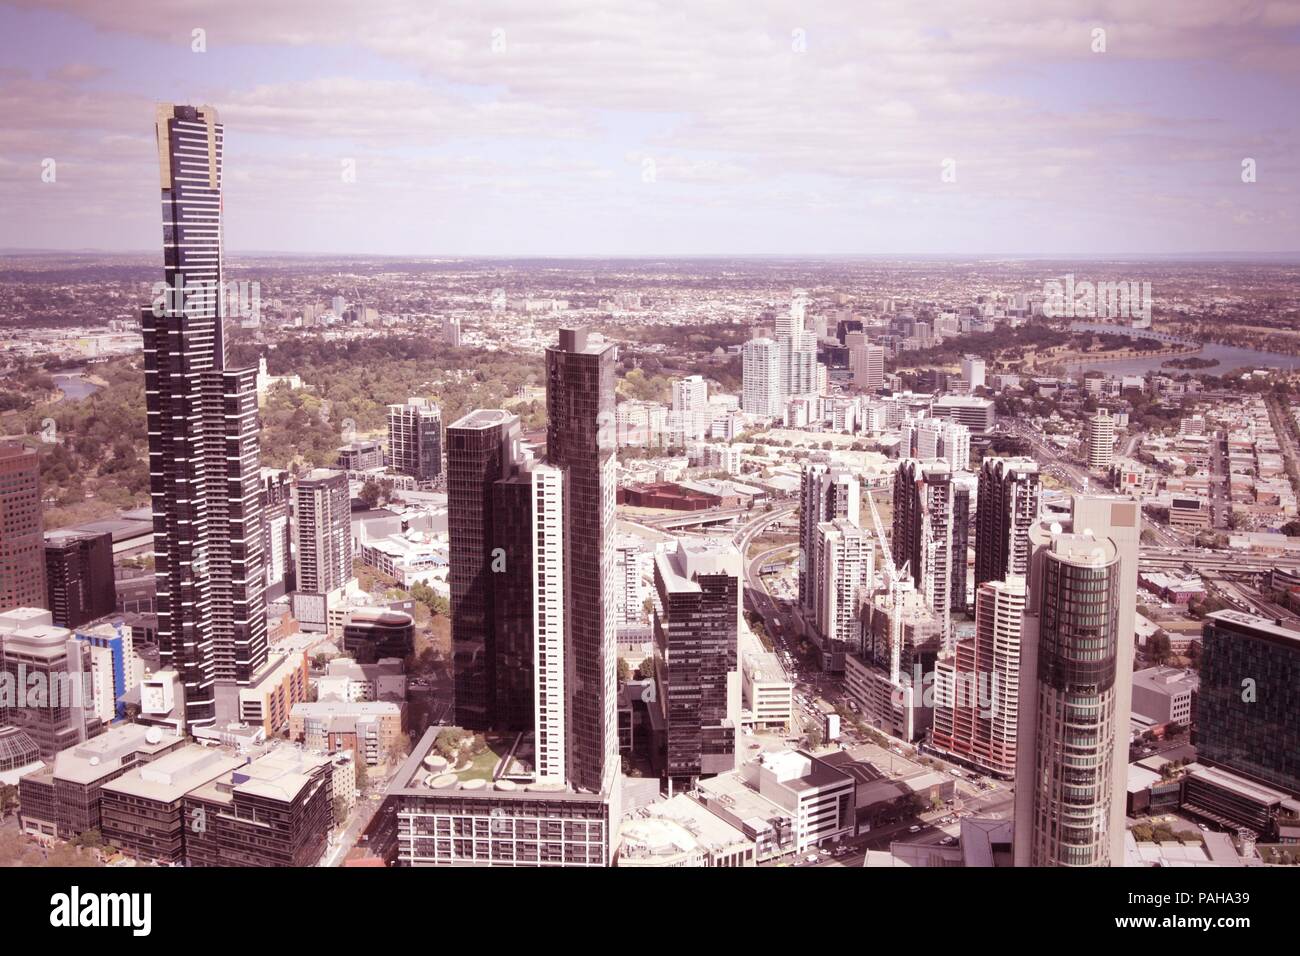 Melbourne, Australia - aerial city view with skyscrapers. Cross processed color tone - retro filtered style. Stock Photo